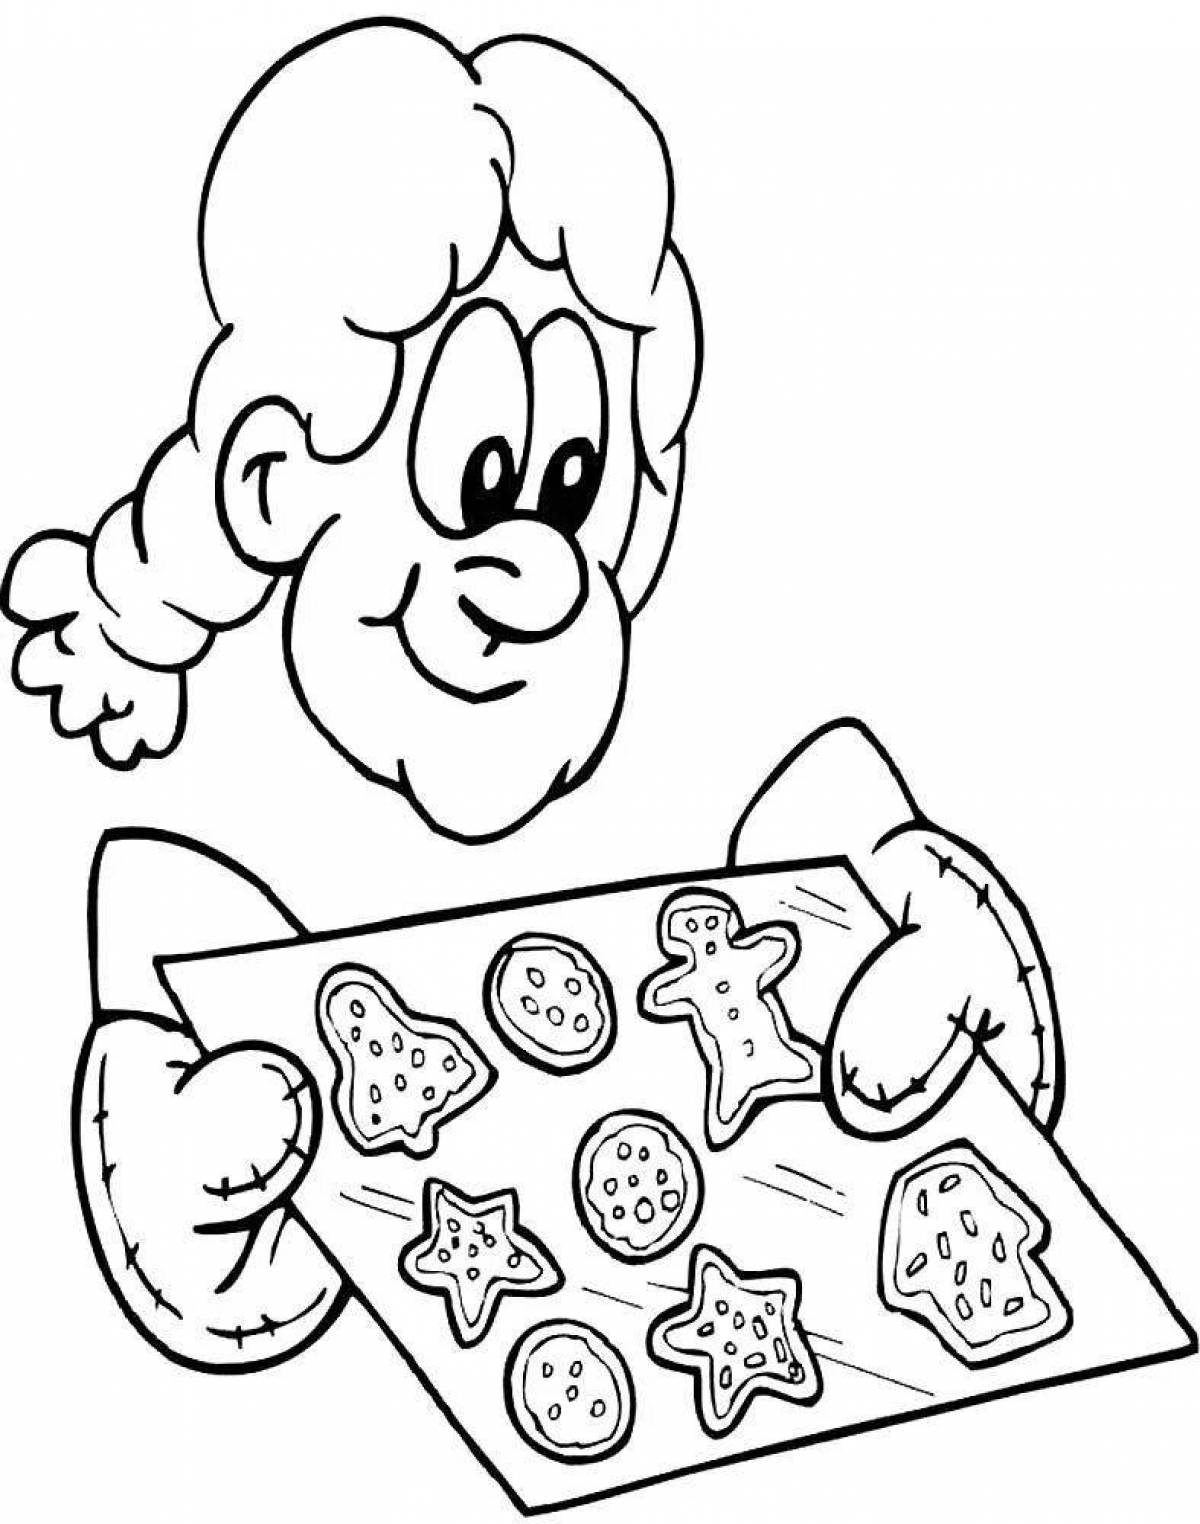 Cookie coloring pages for kids